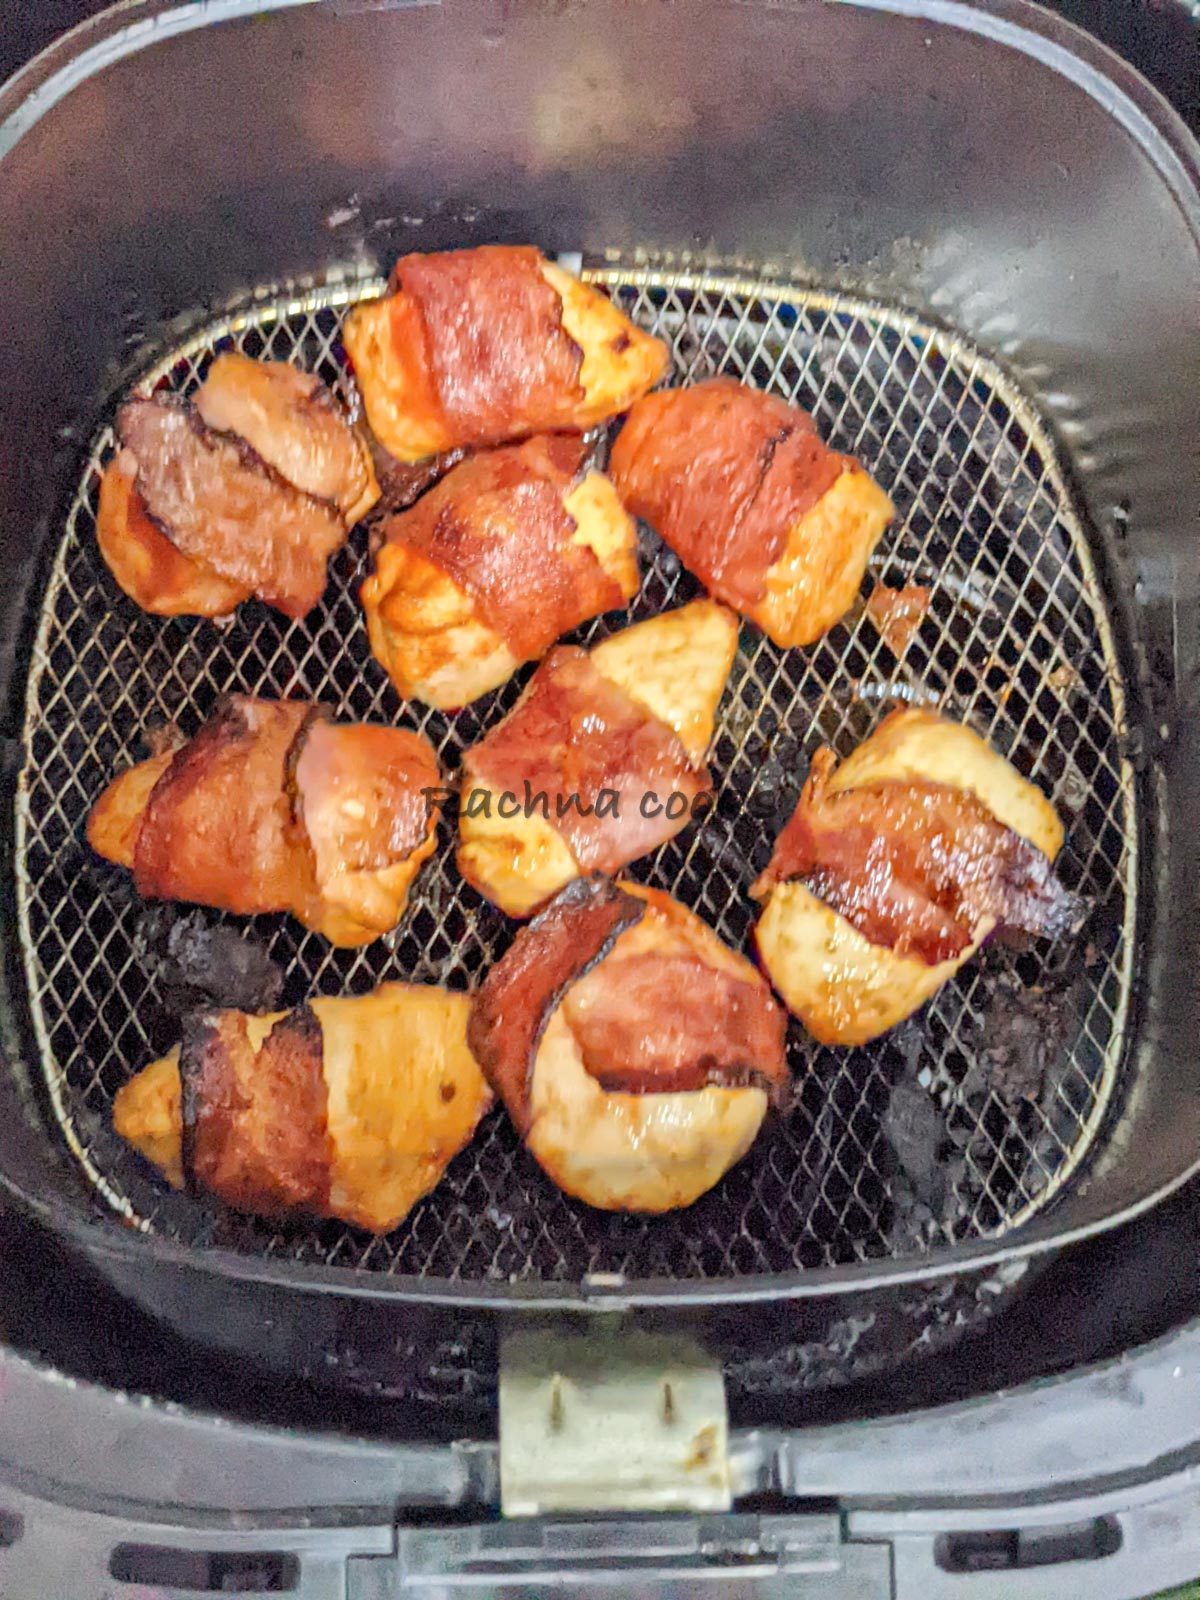 Browned bacon enwrapping cooked chicken bites in air fryer basket ready to be eaten.